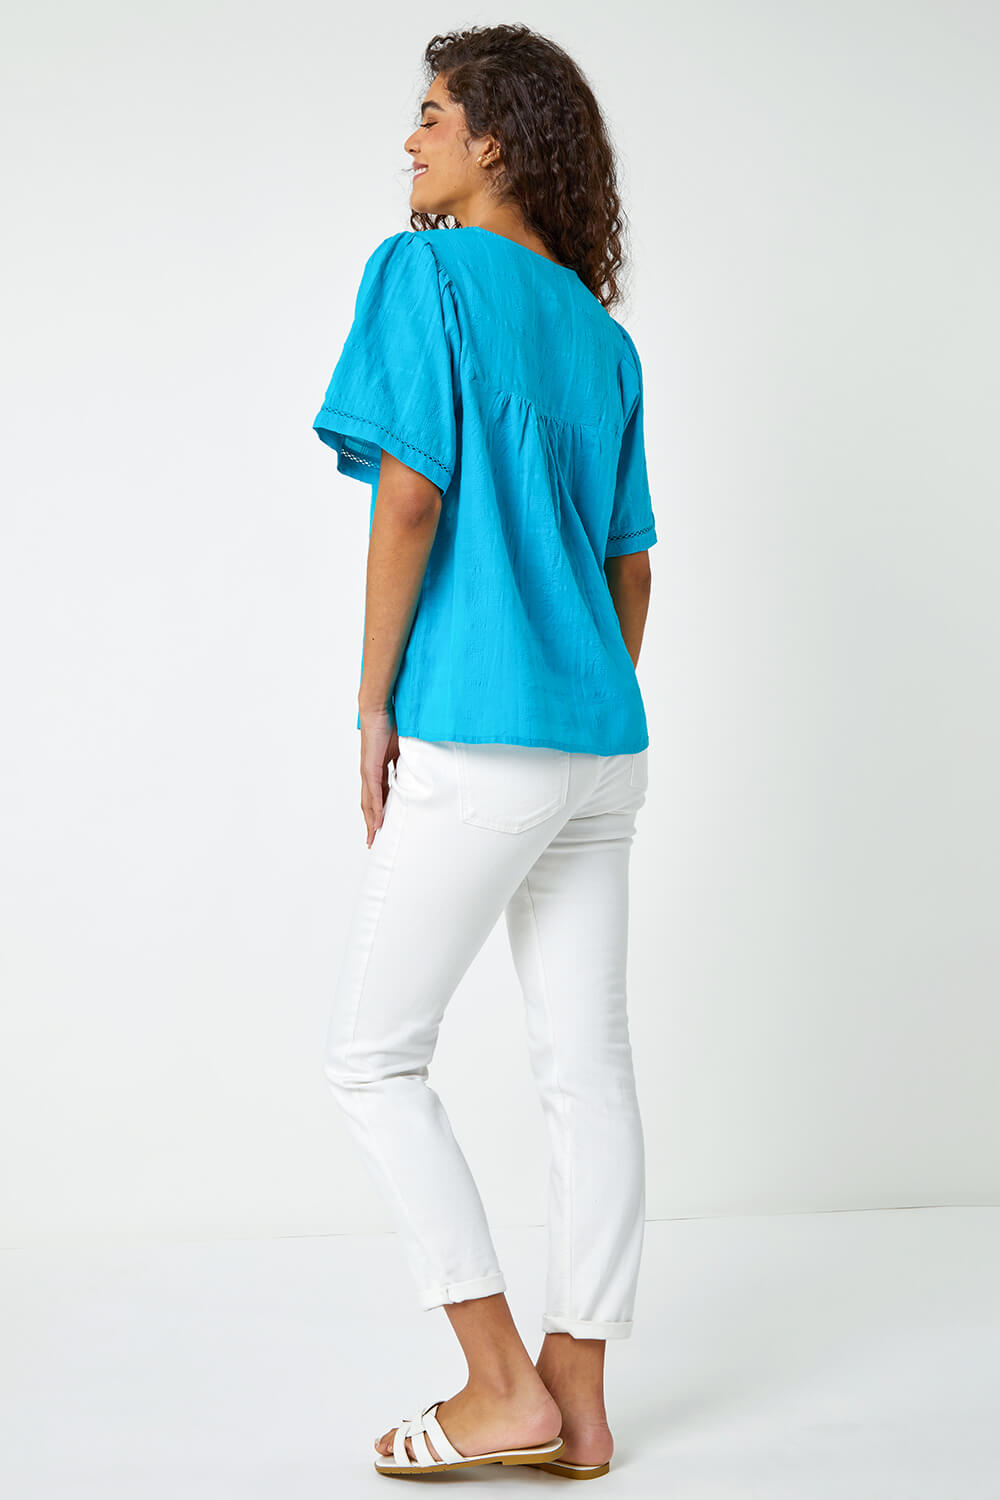 Turquoise Lace Detail Cotton T-Shirt, Image 3 of 5